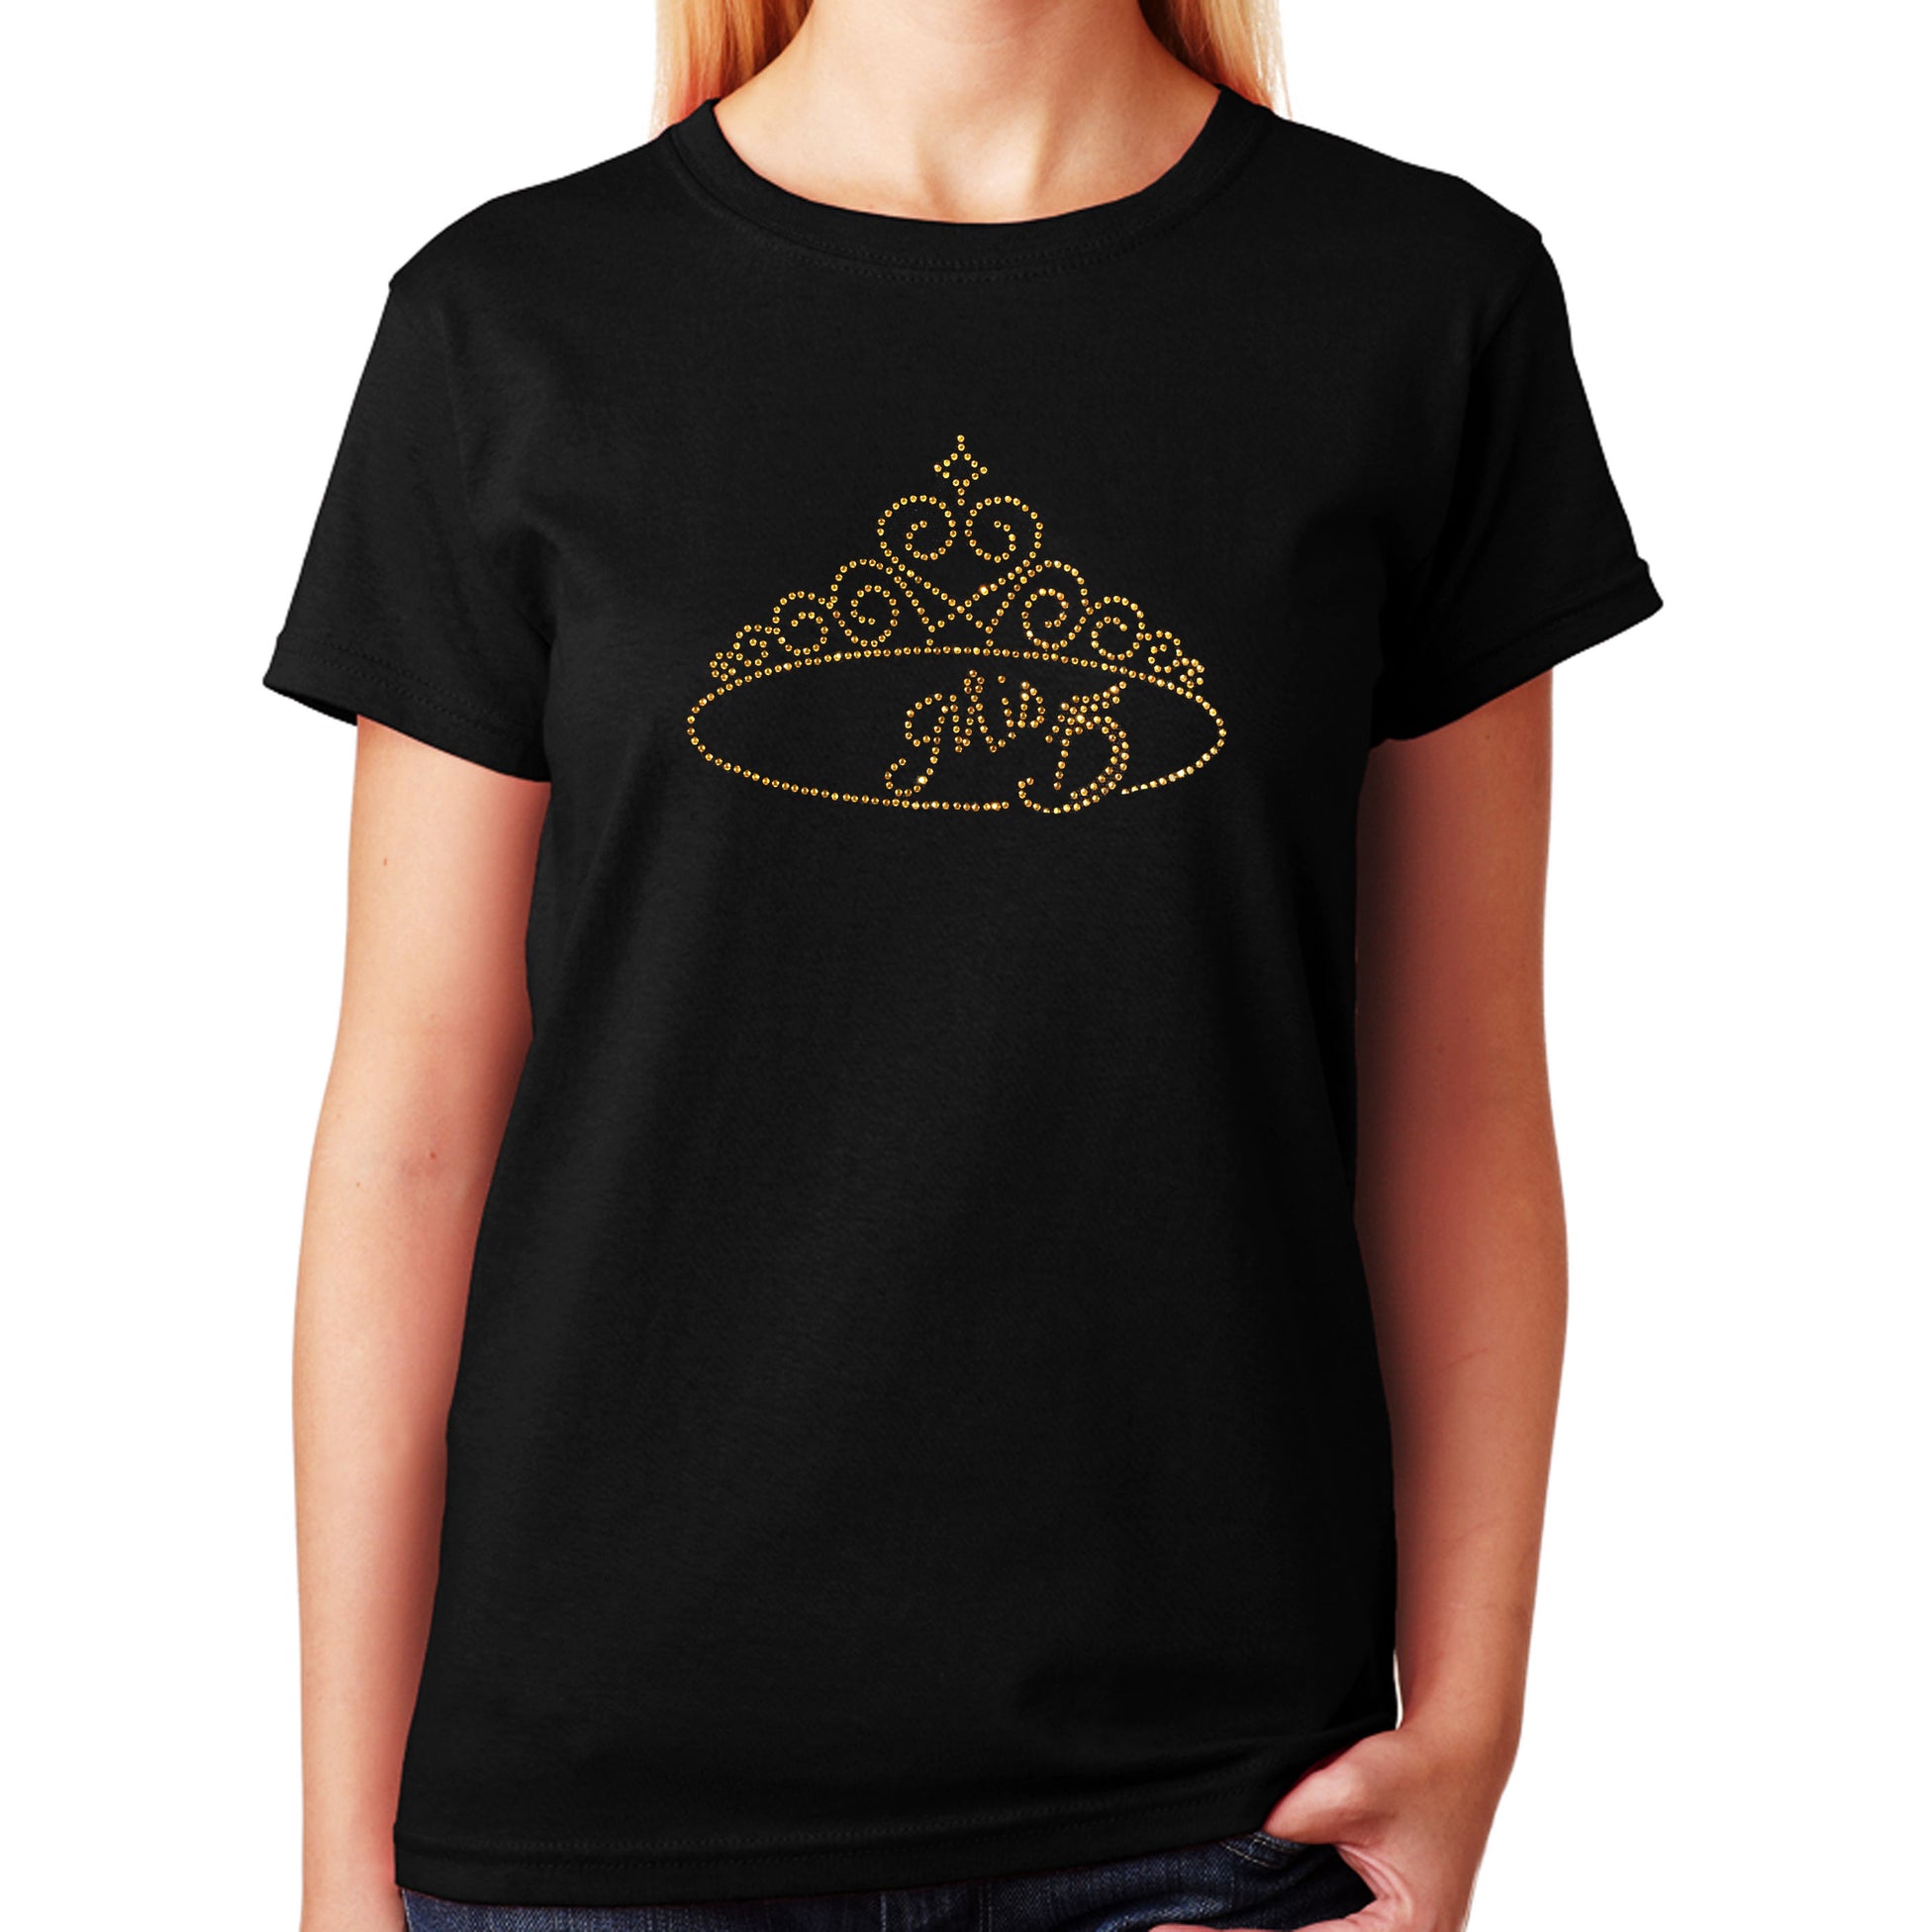 Unisex T-Shirt with Mis Quince Gold Tiara in Rhinestones